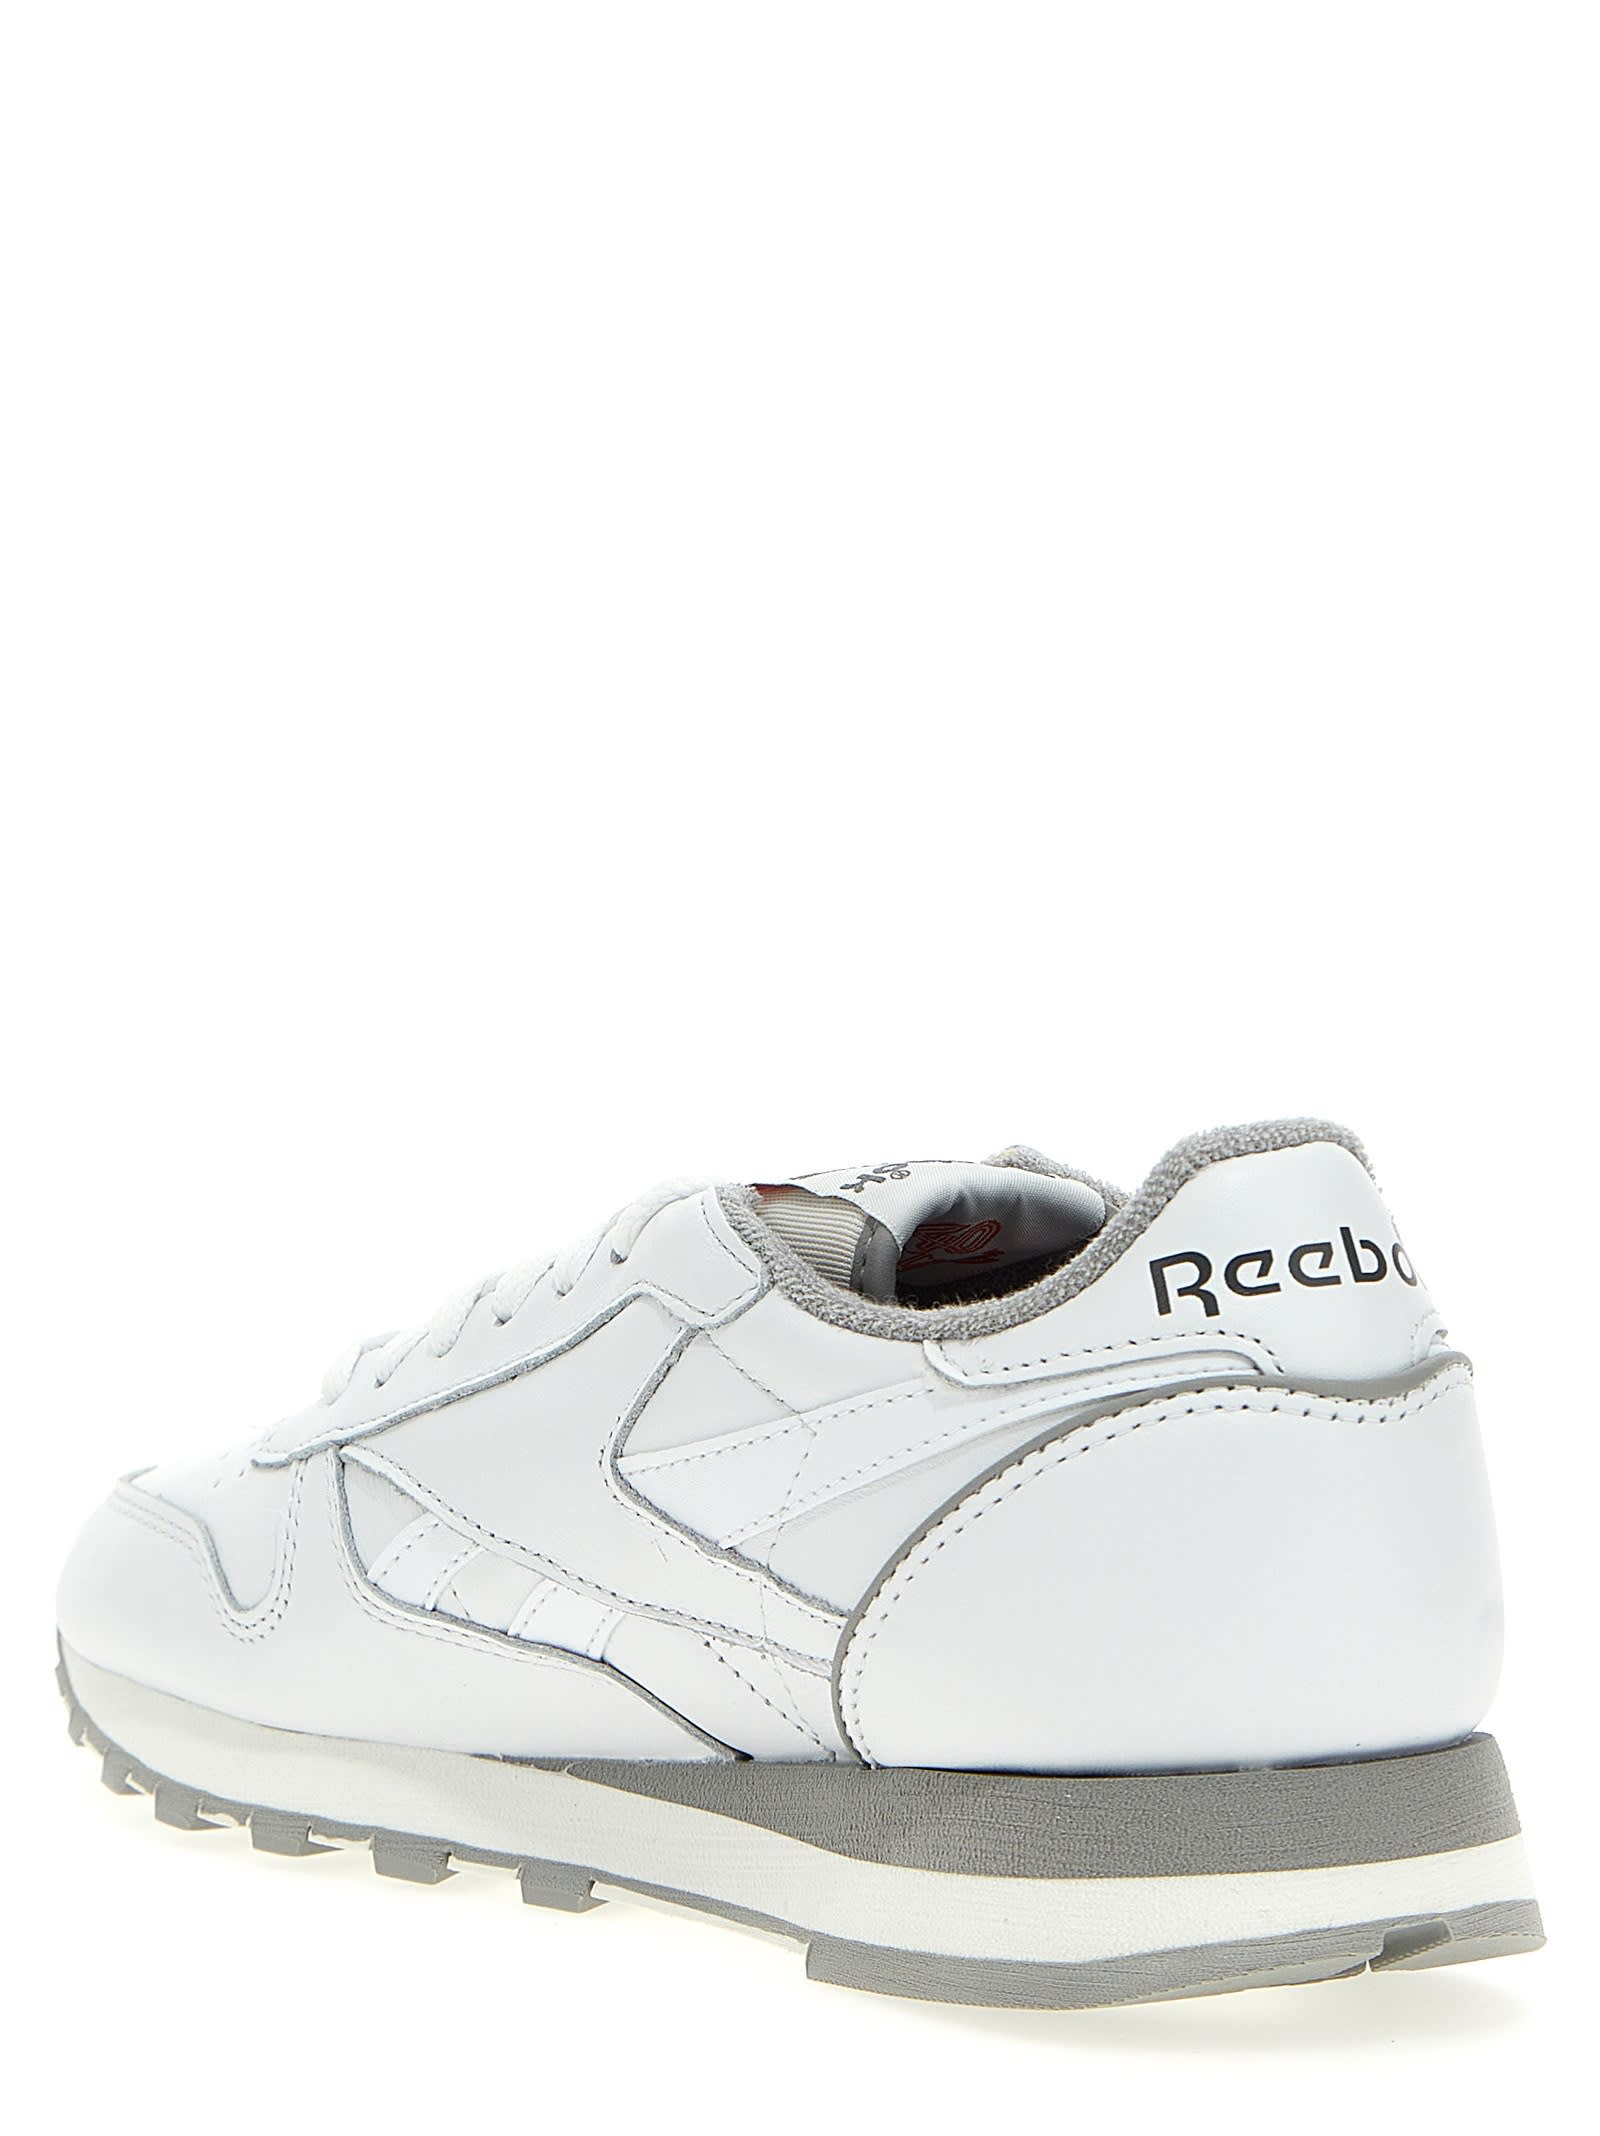 Shop Reebok Classic Leather 40 Years Sneakers In White